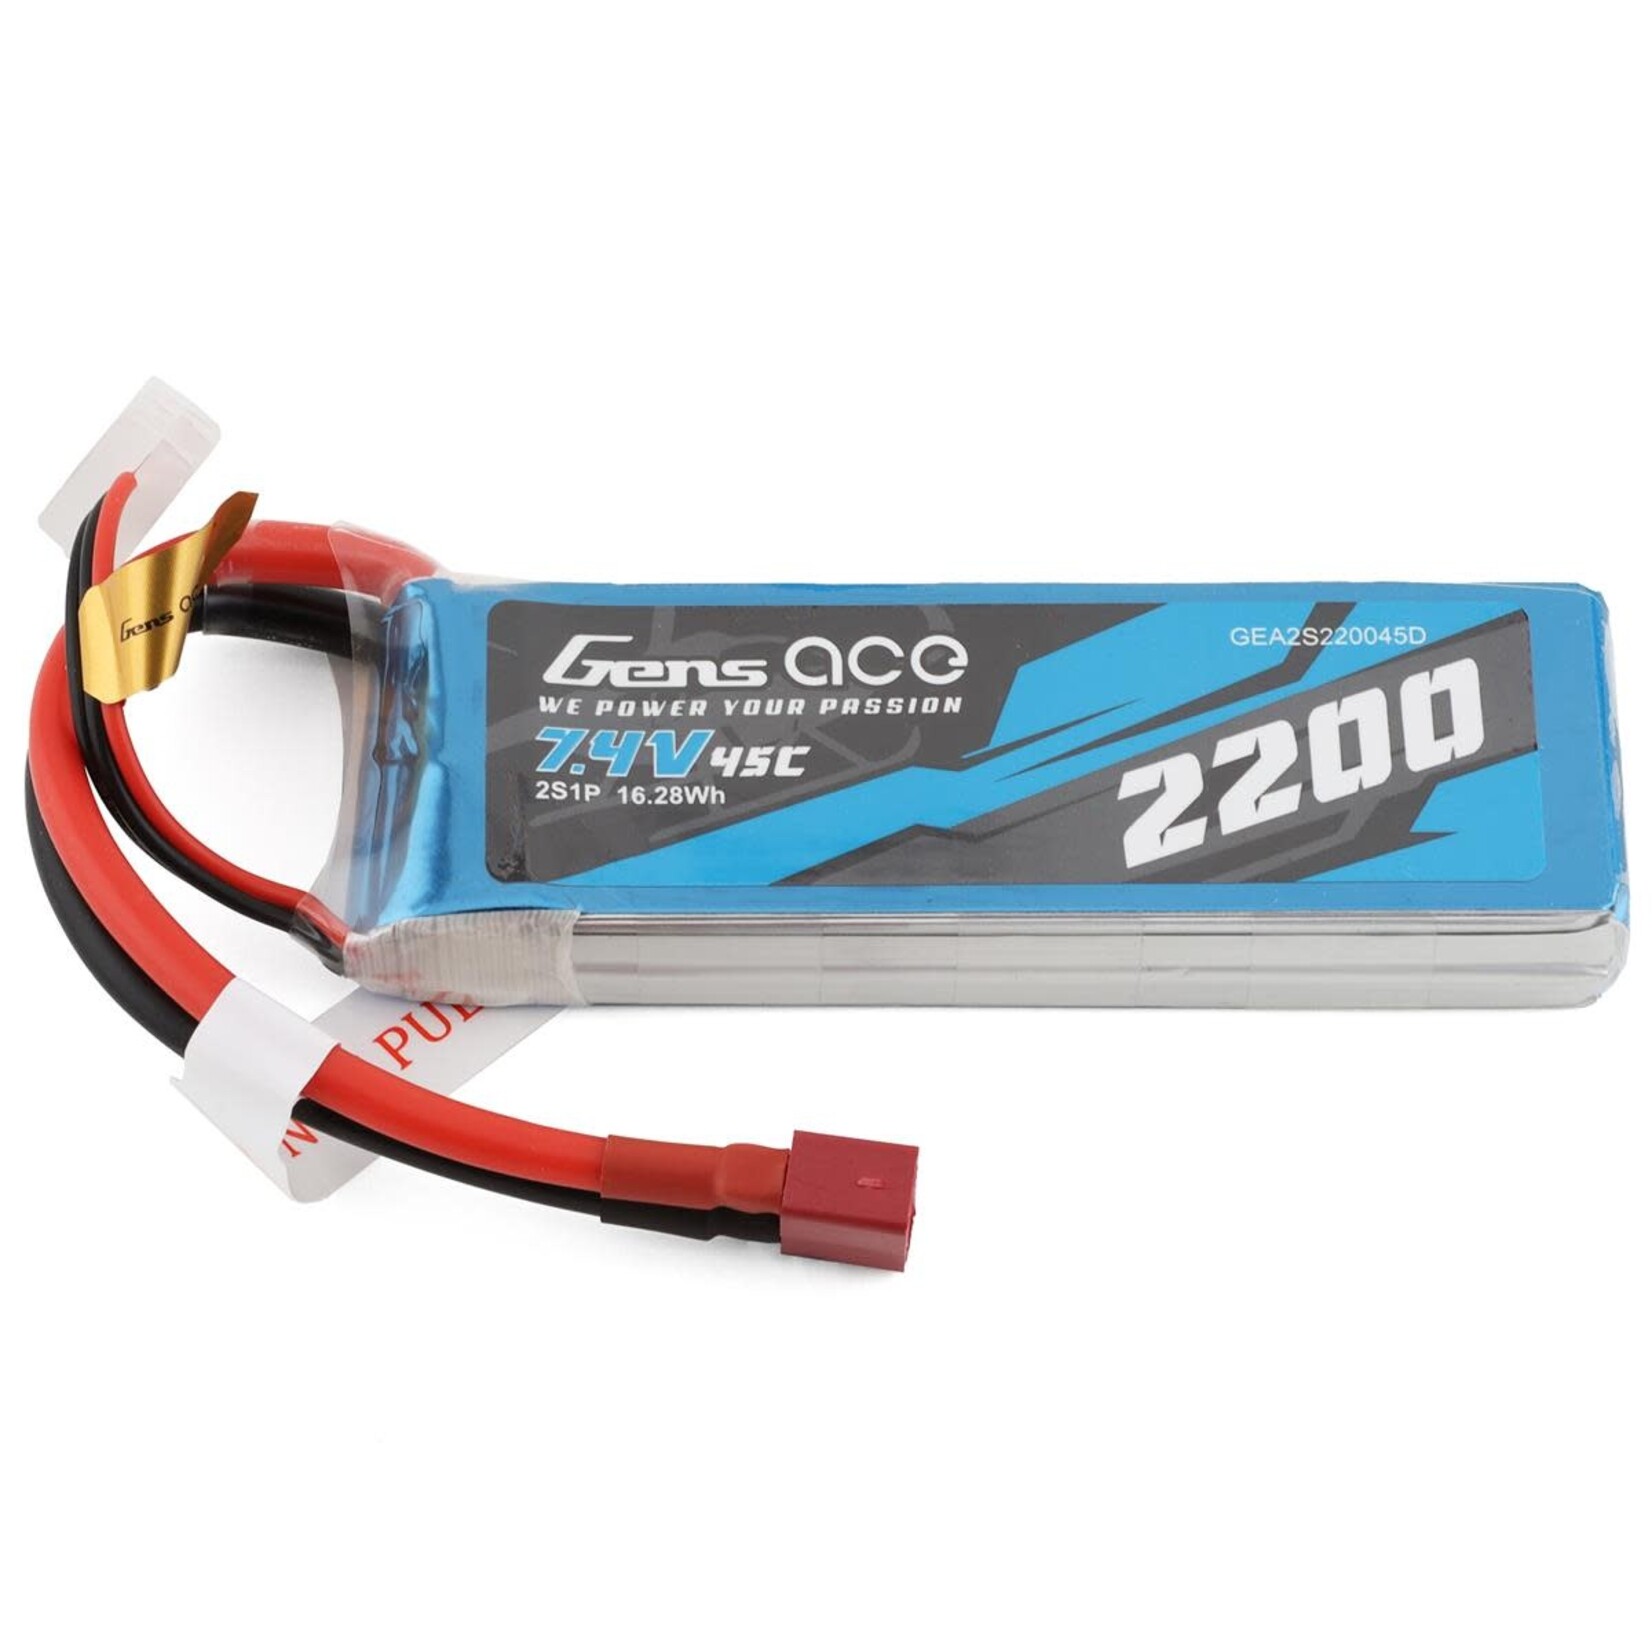 Gens Ace Gens Ace 2S LiPo Battery 45C (7.4V/2200mAh) w/T-Style Connector #GEA2S220045D